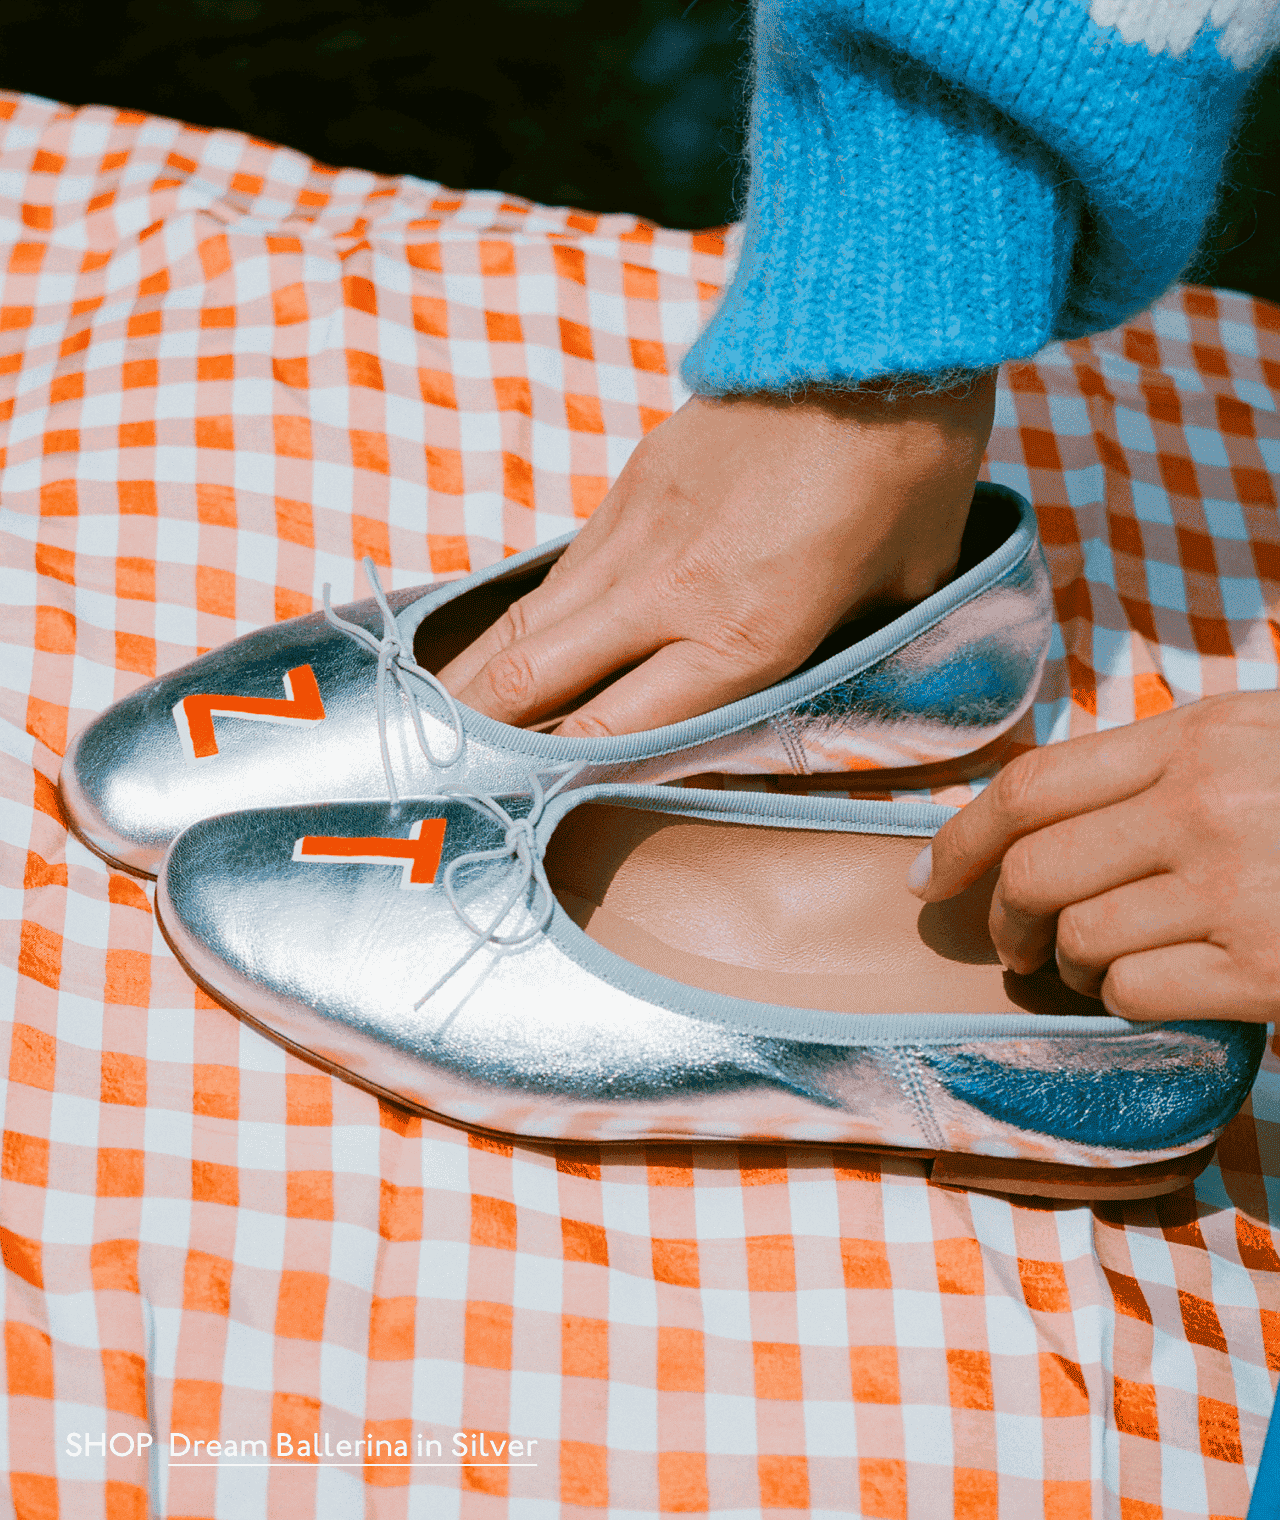 Our most popular flats are now available in new hues and textures. Shop the Dream Ballerina in Silver and more colors now.